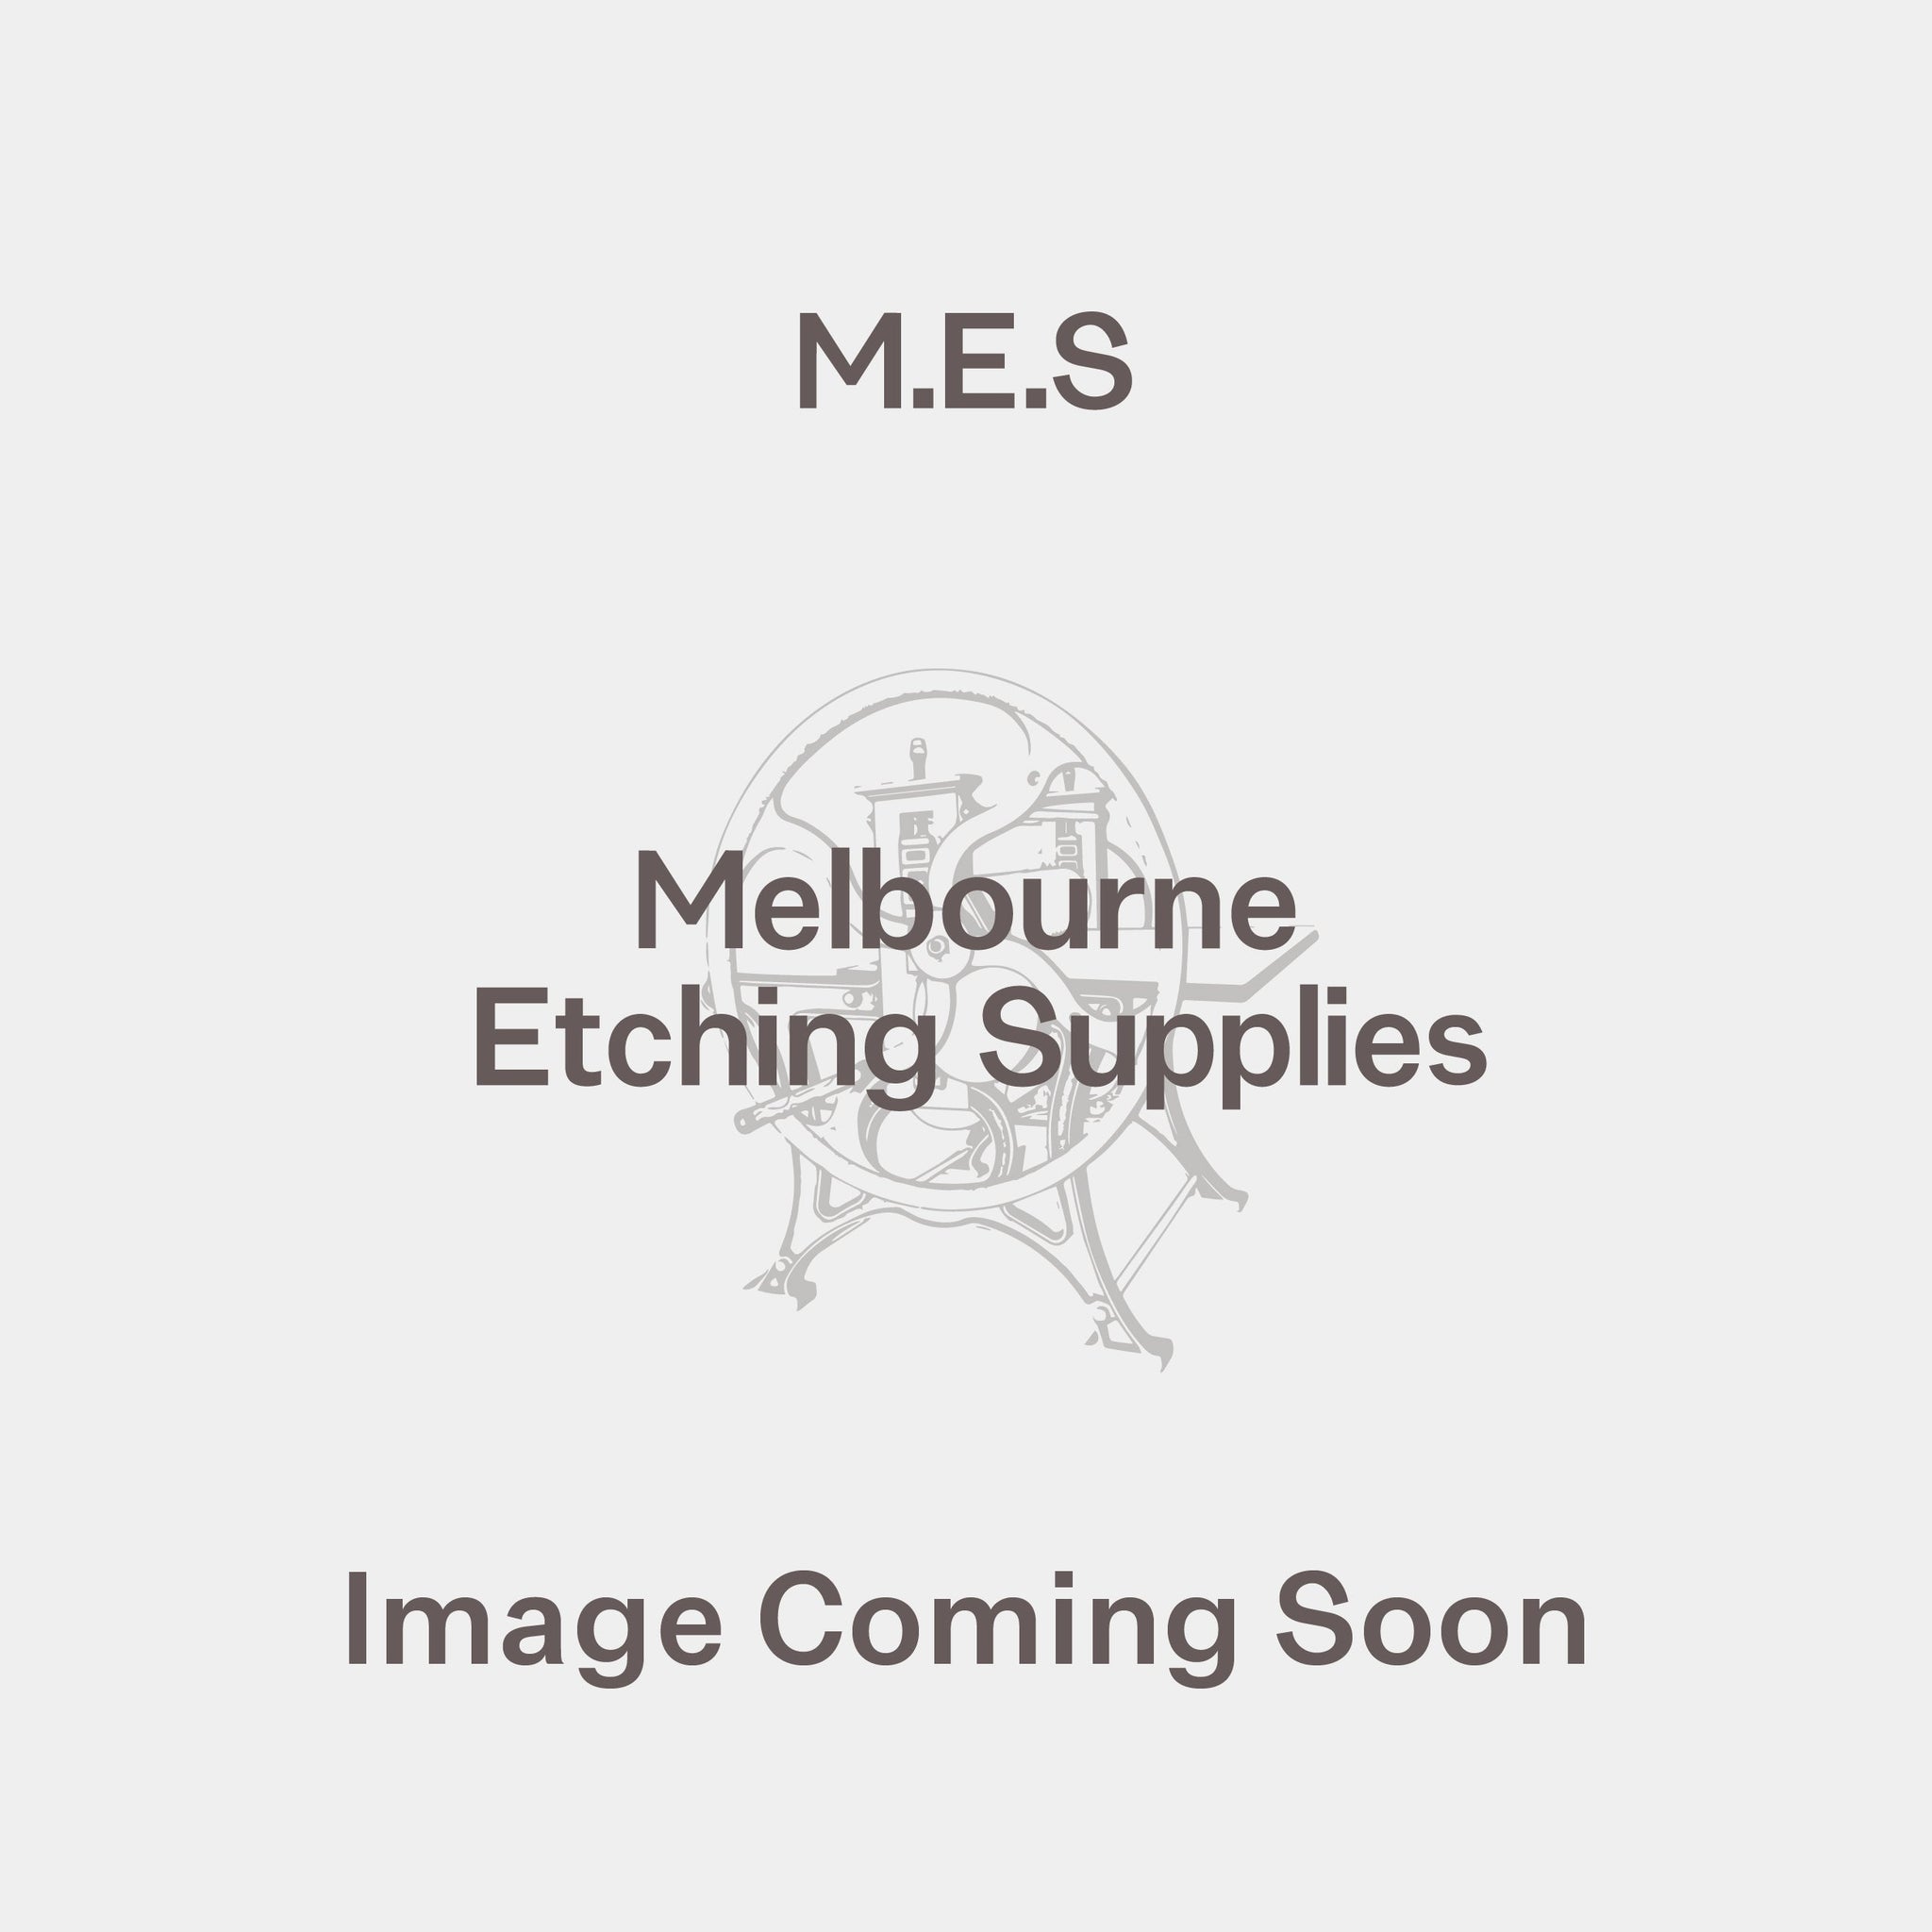 Boxboard - Melbourne Etching Supplies